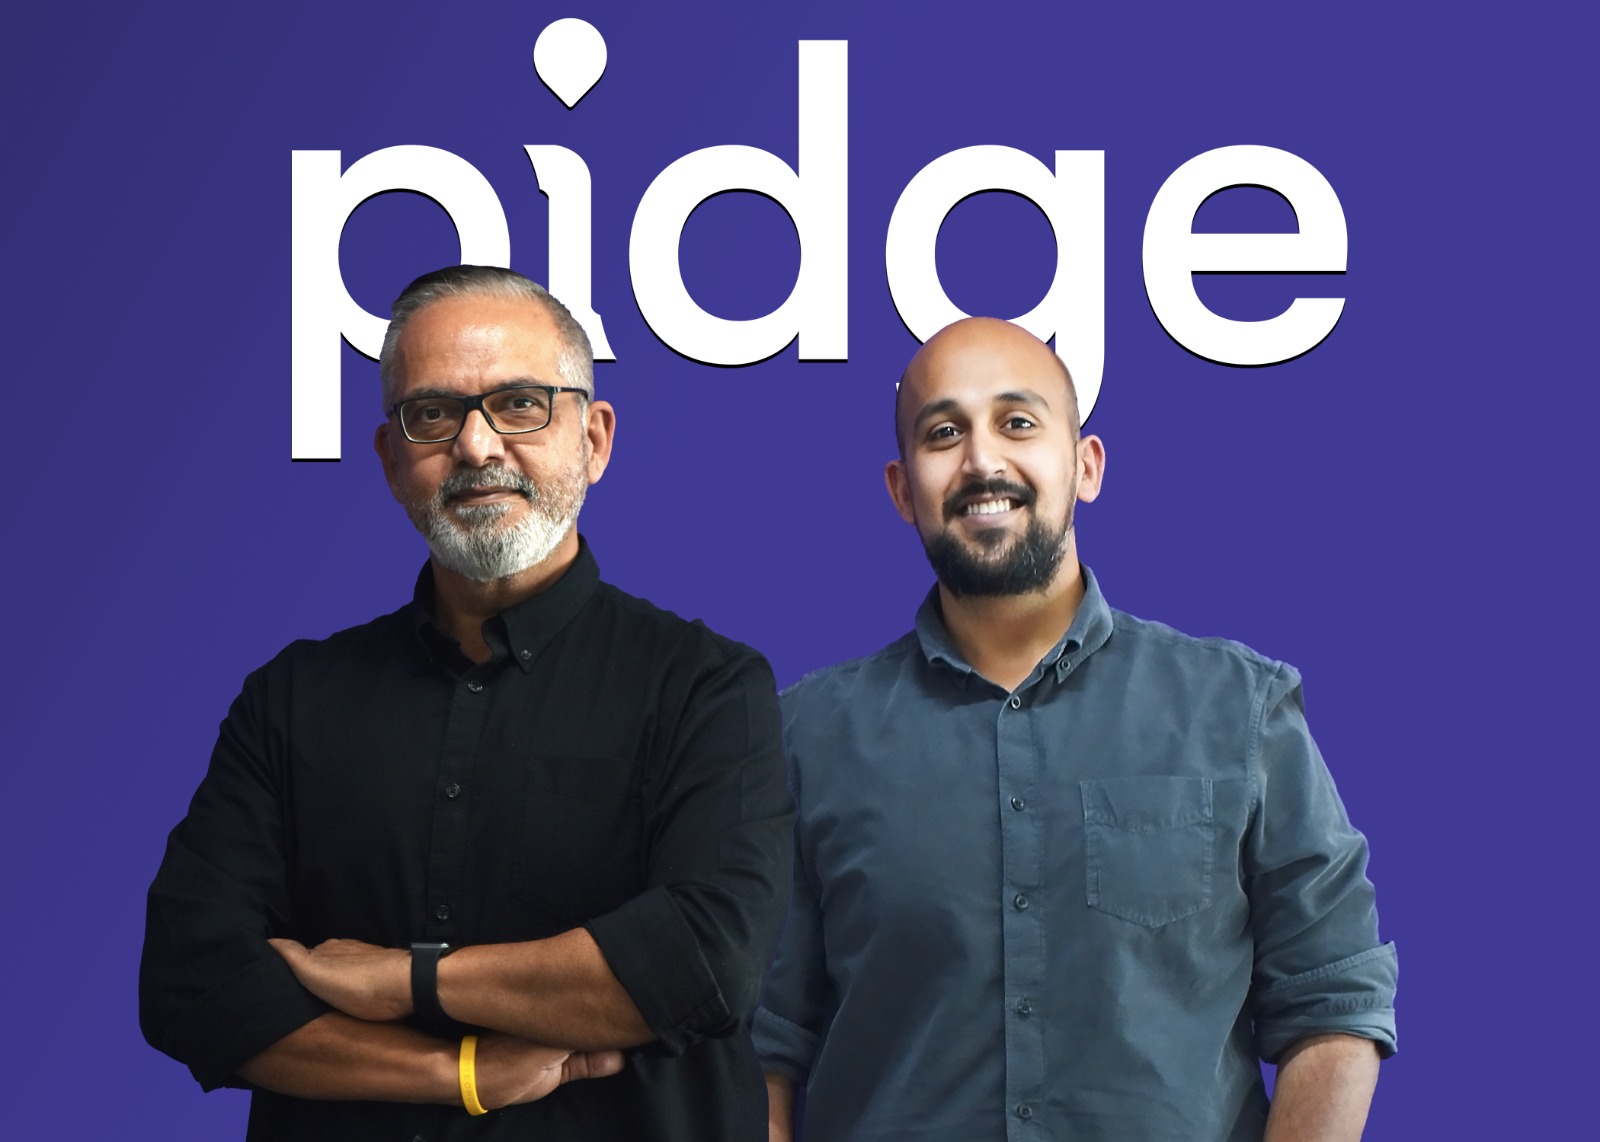 Logistics SaaS startup Pidge raised $3 million led by Mountain Partners along with existing investors